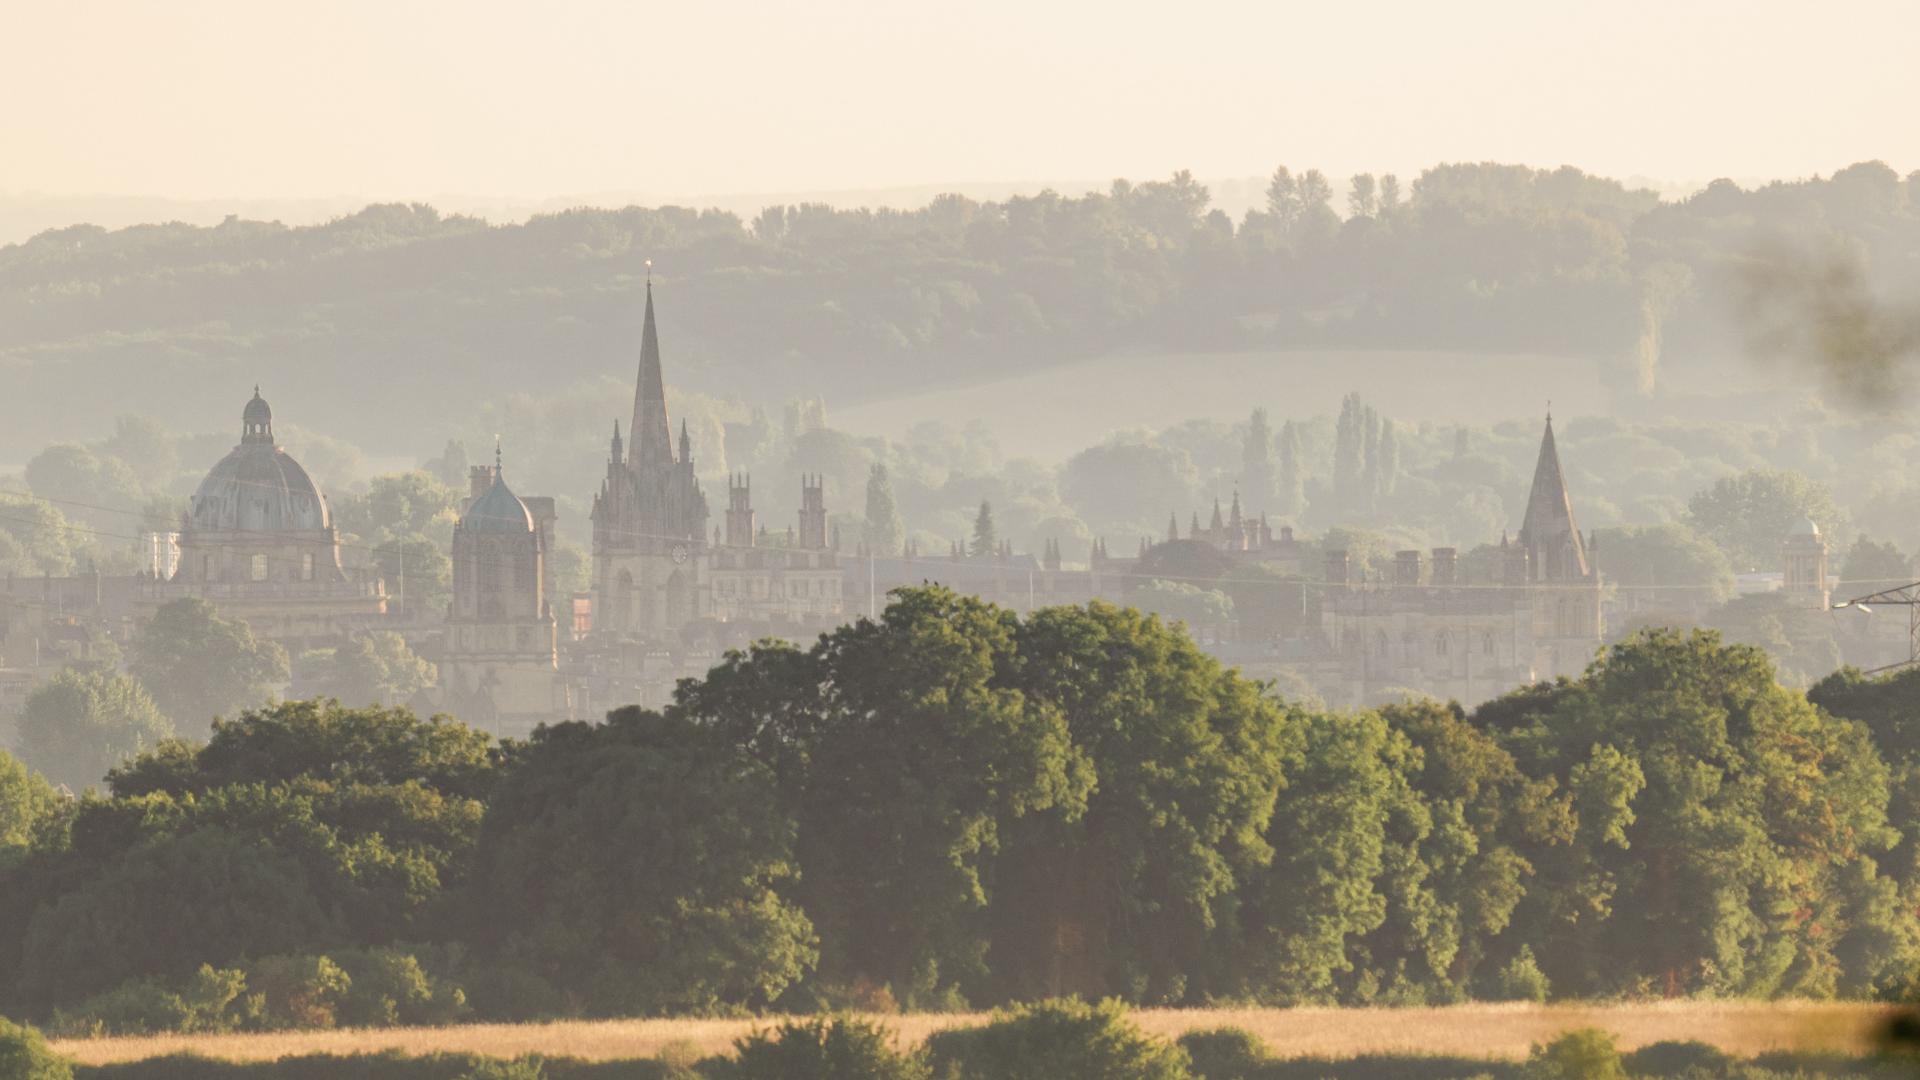 Dreaming Spires of Oxford - from Old Berkeley Golf Course